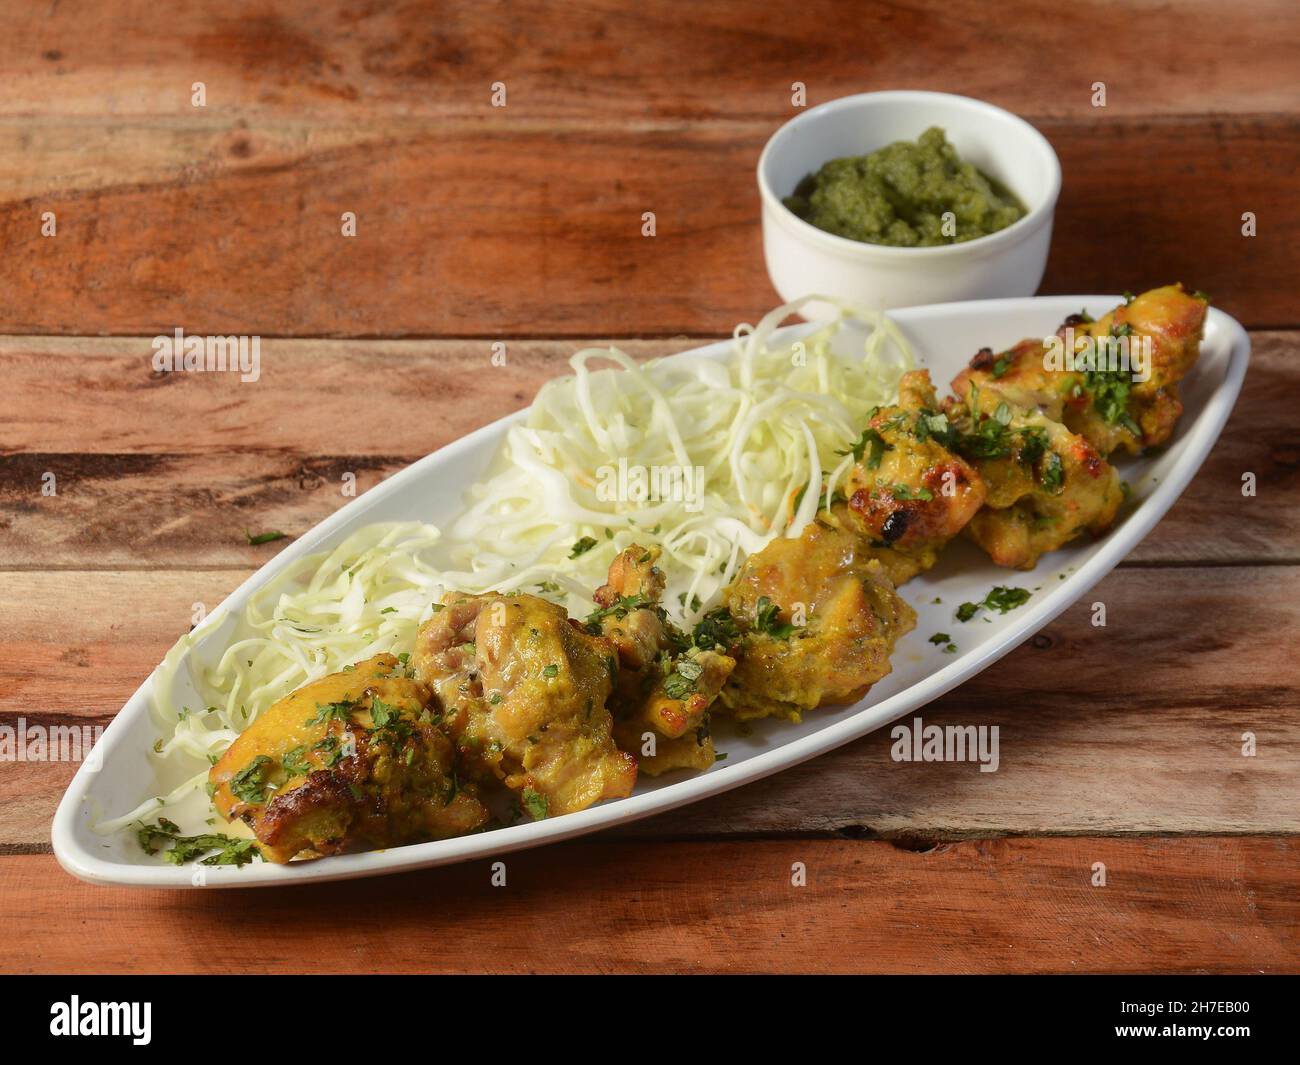 Murgh bangara kebab on wooden background. Dishes and appetizers of indian cuisine, selective focus Stock Photo